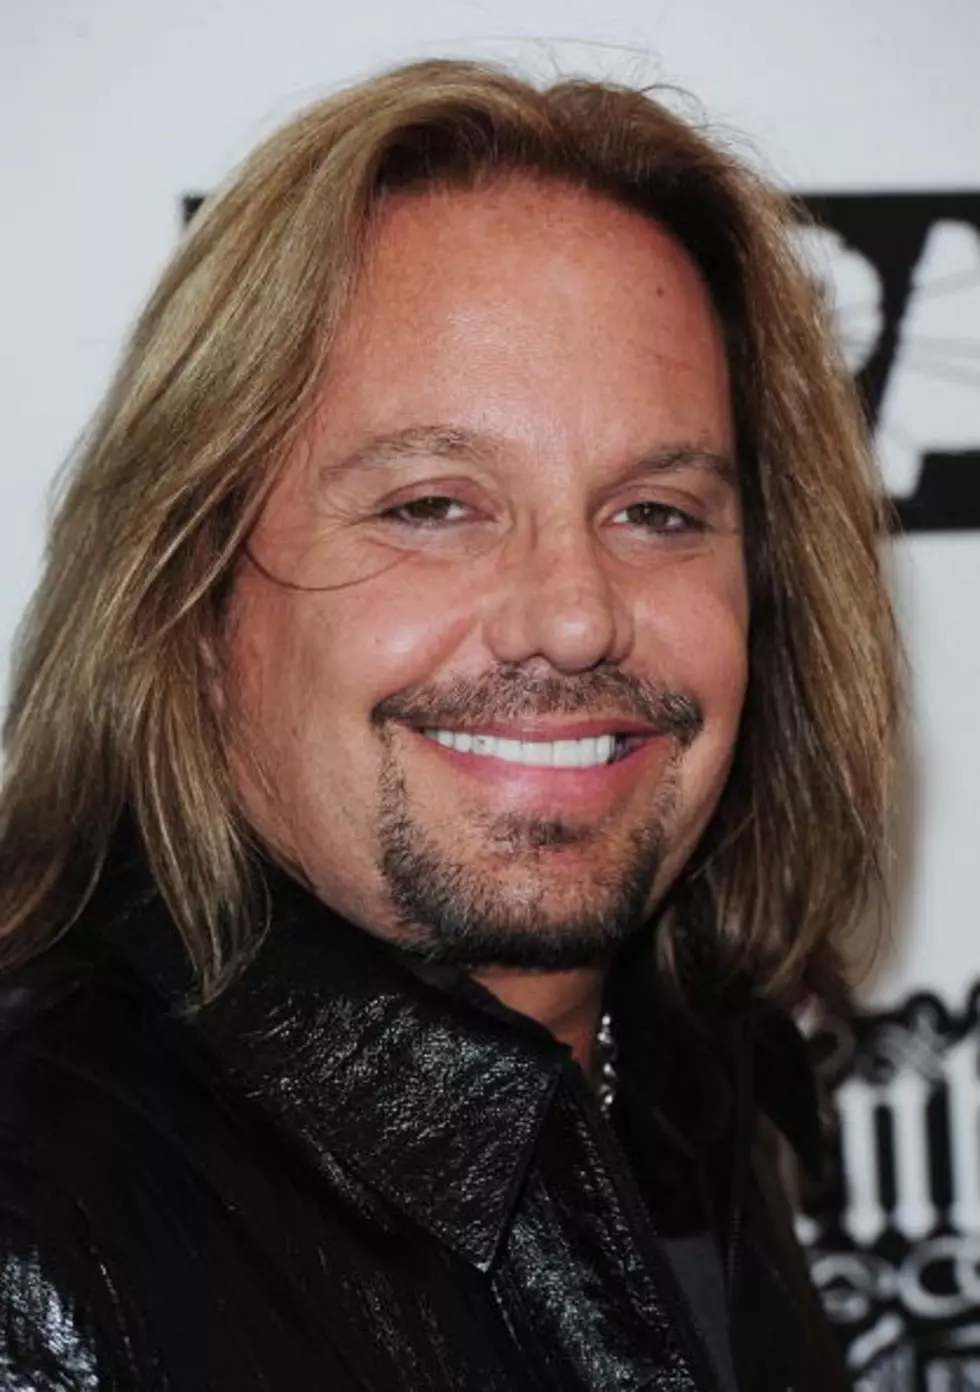 Vince Neil’s Court Date Approaches